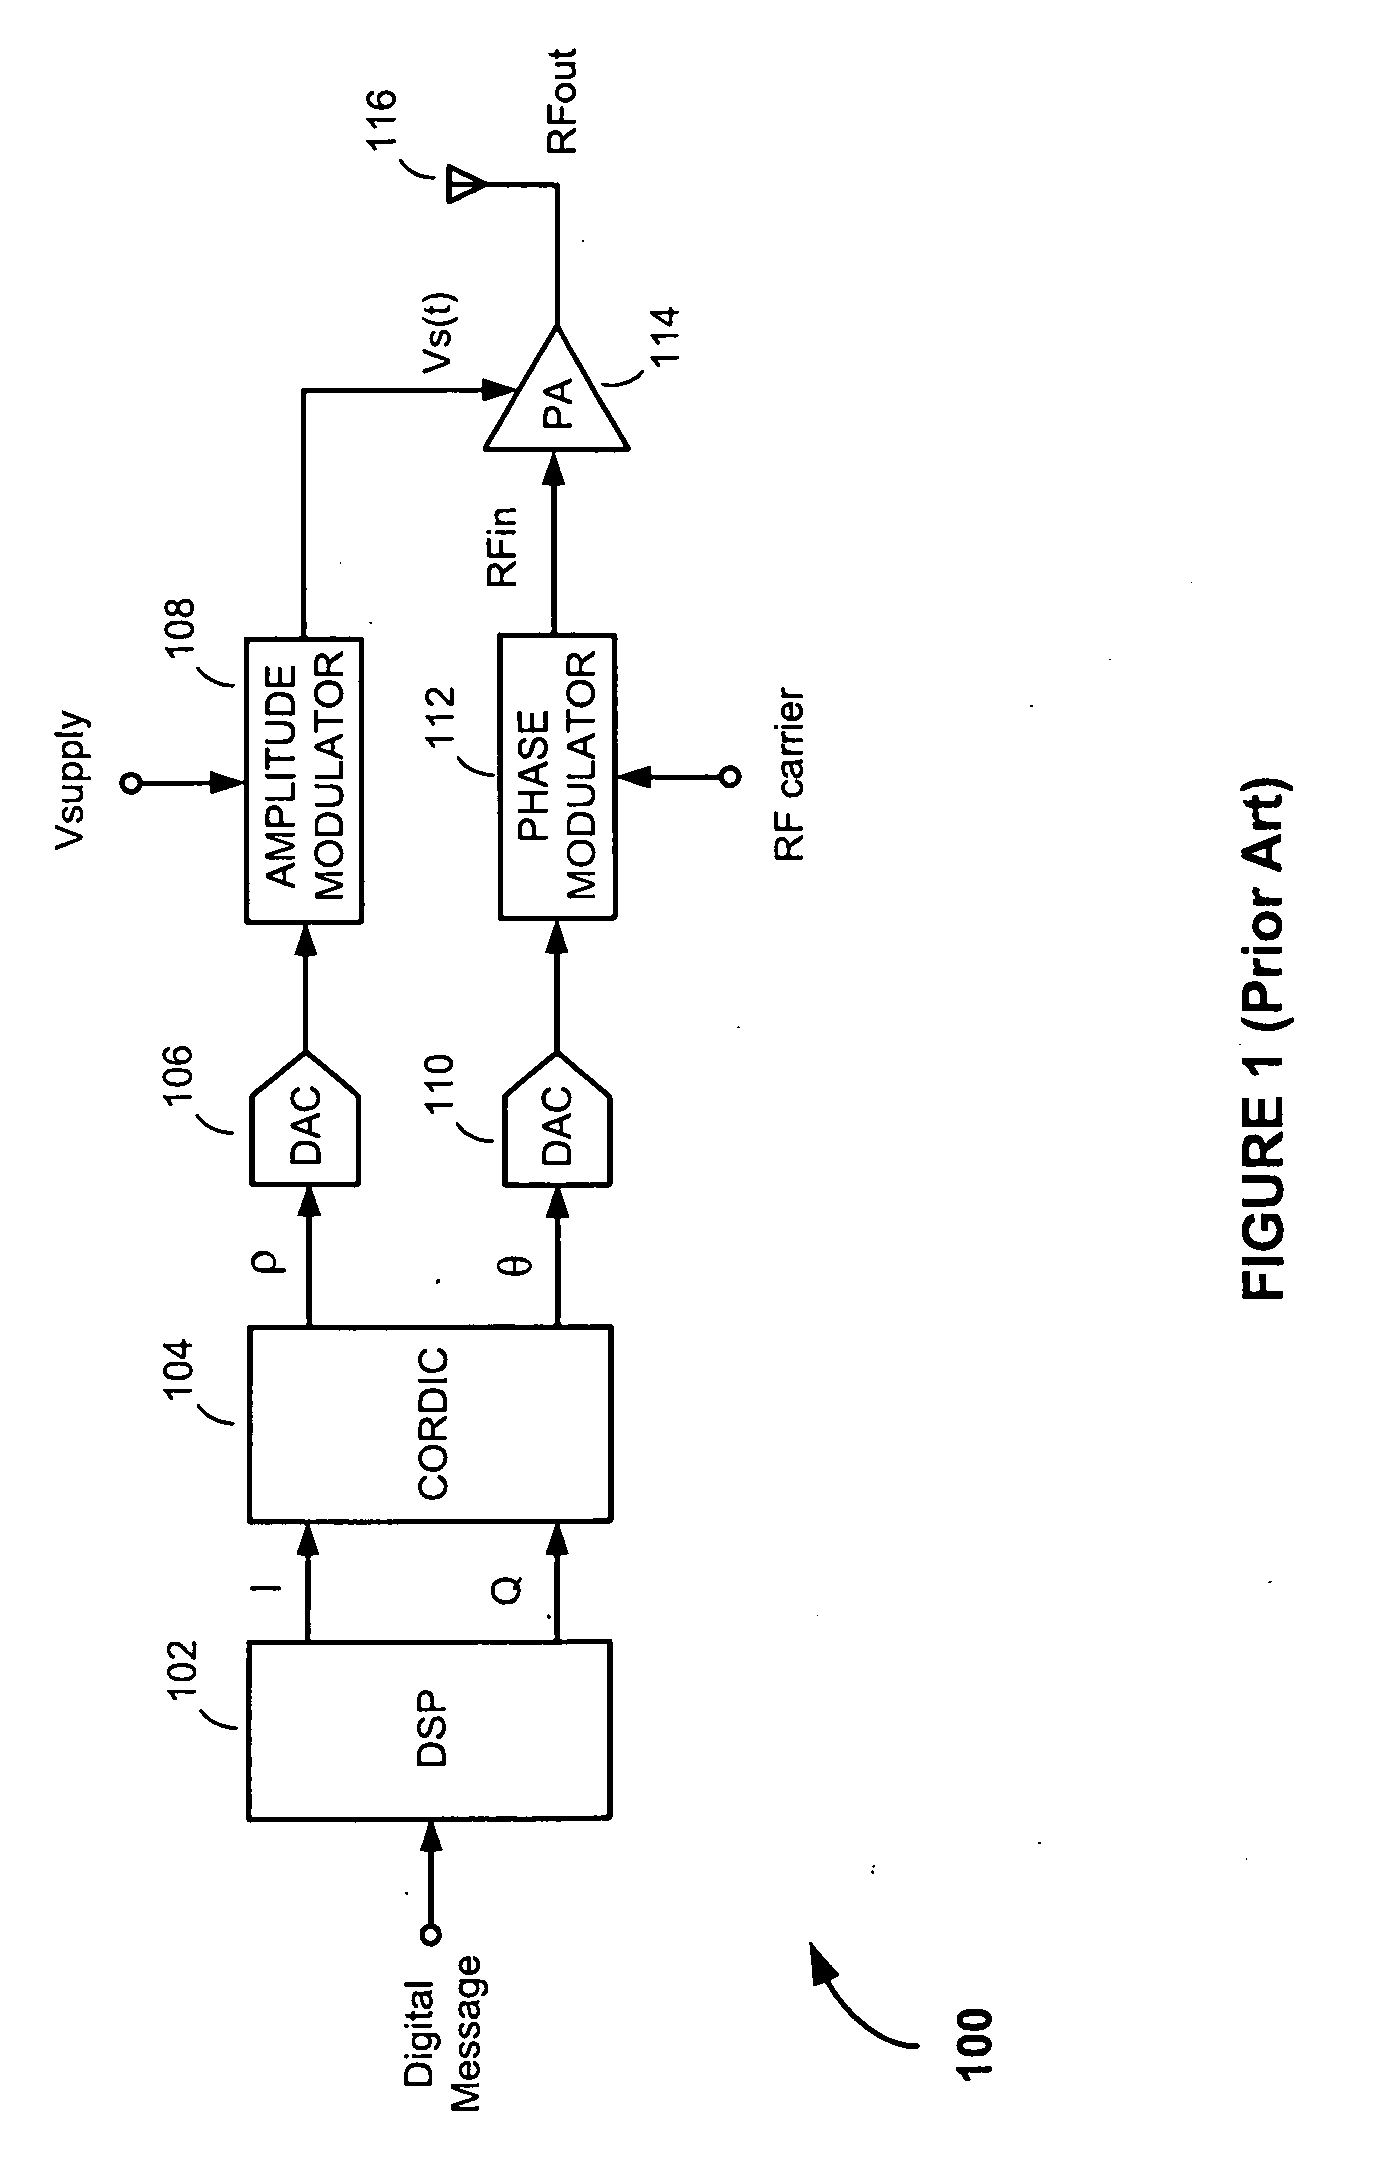 Time alignment methods and apparatus for polar modulation transmitters